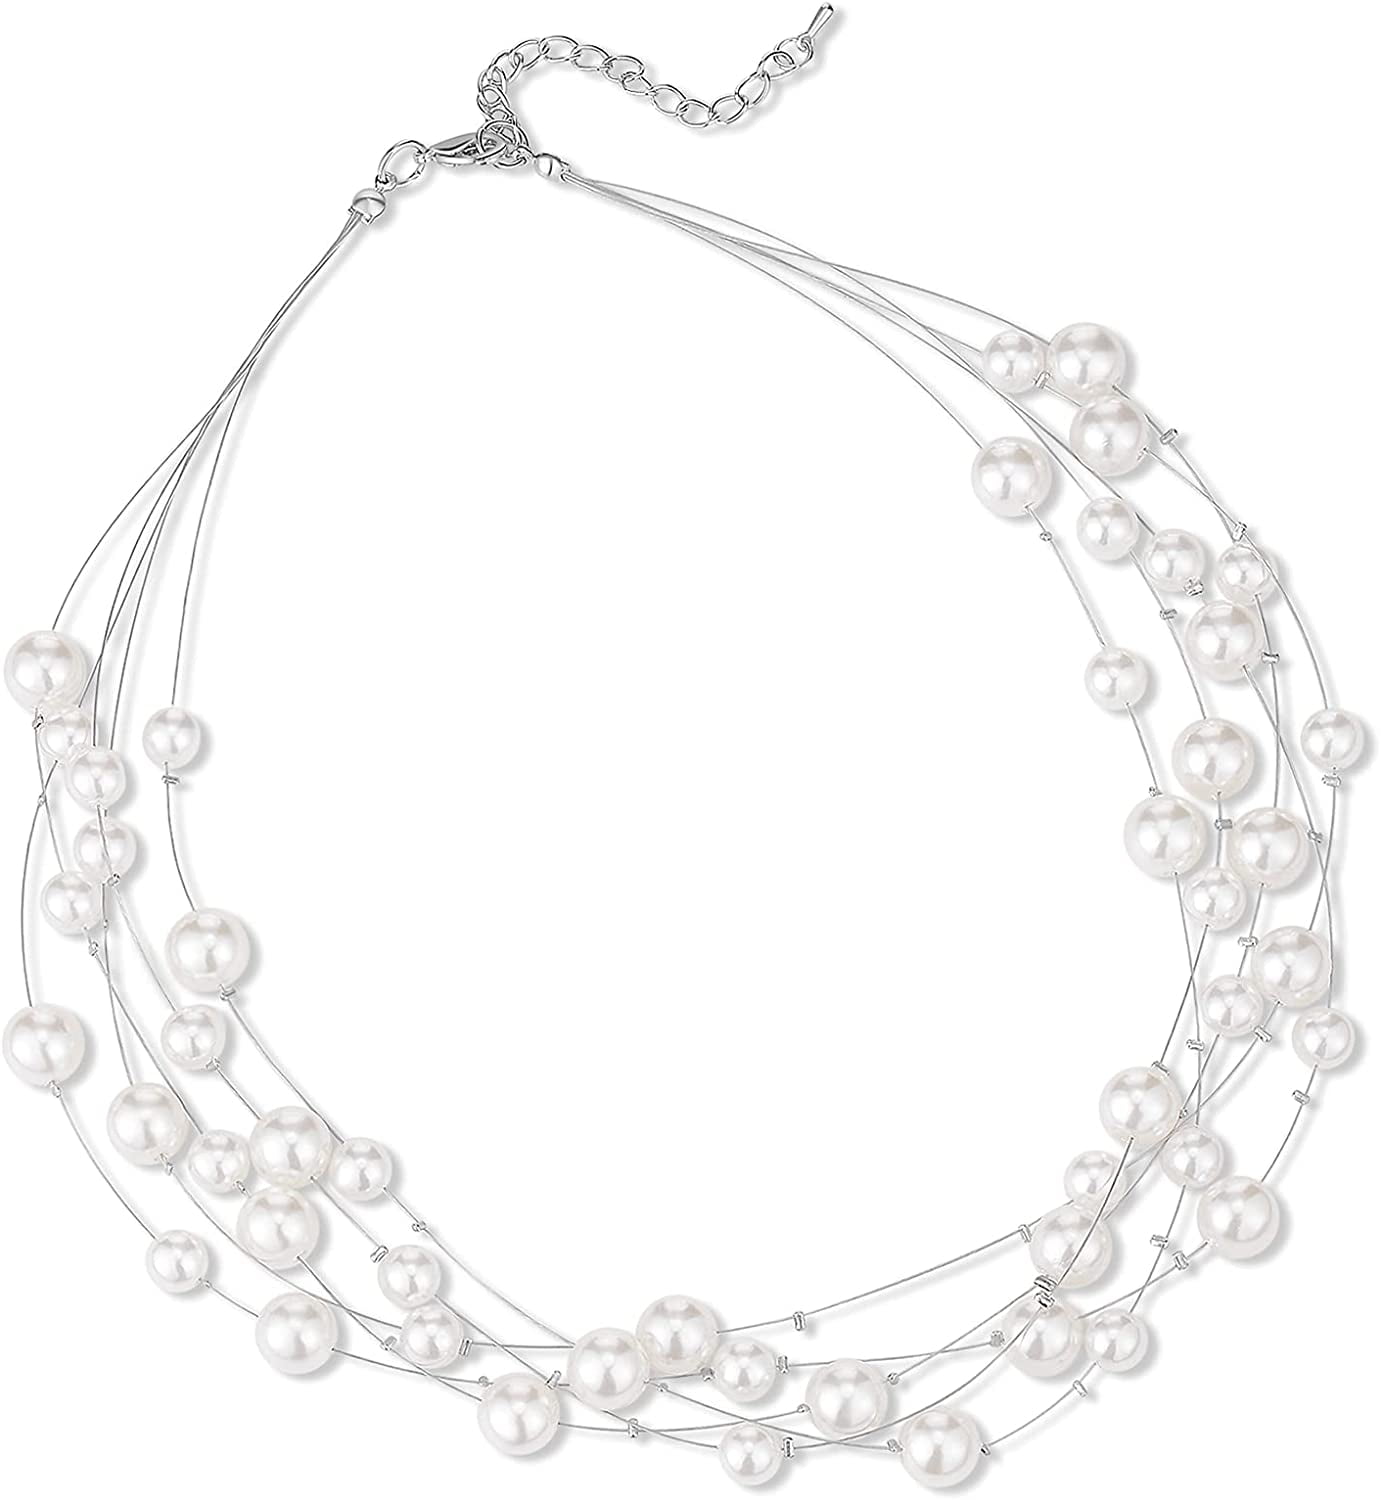 Take Note - Silver White Pearl Necklace - Paparazzi Accessories - Bling  With Dawn